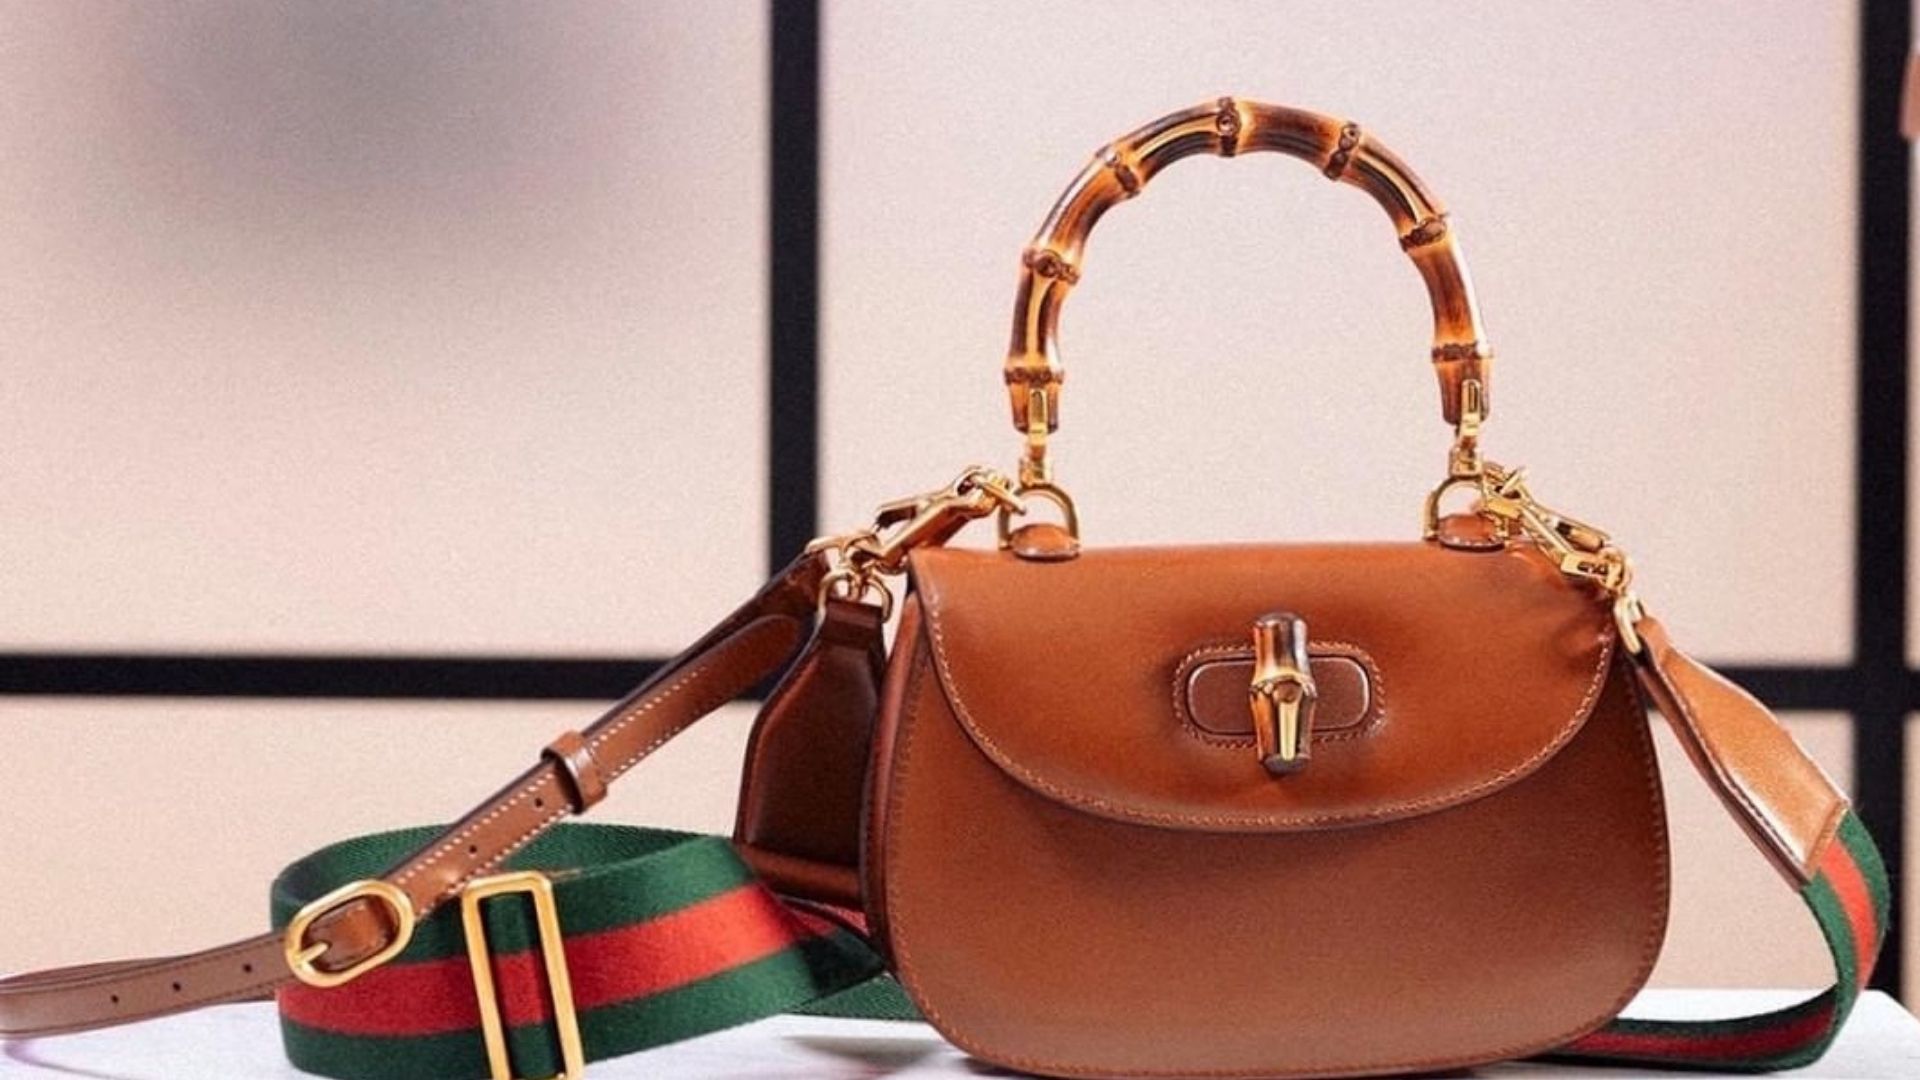 Gucci Bags for Sale in Gucci Upcoming Sale 2023 - Paisa Wapas